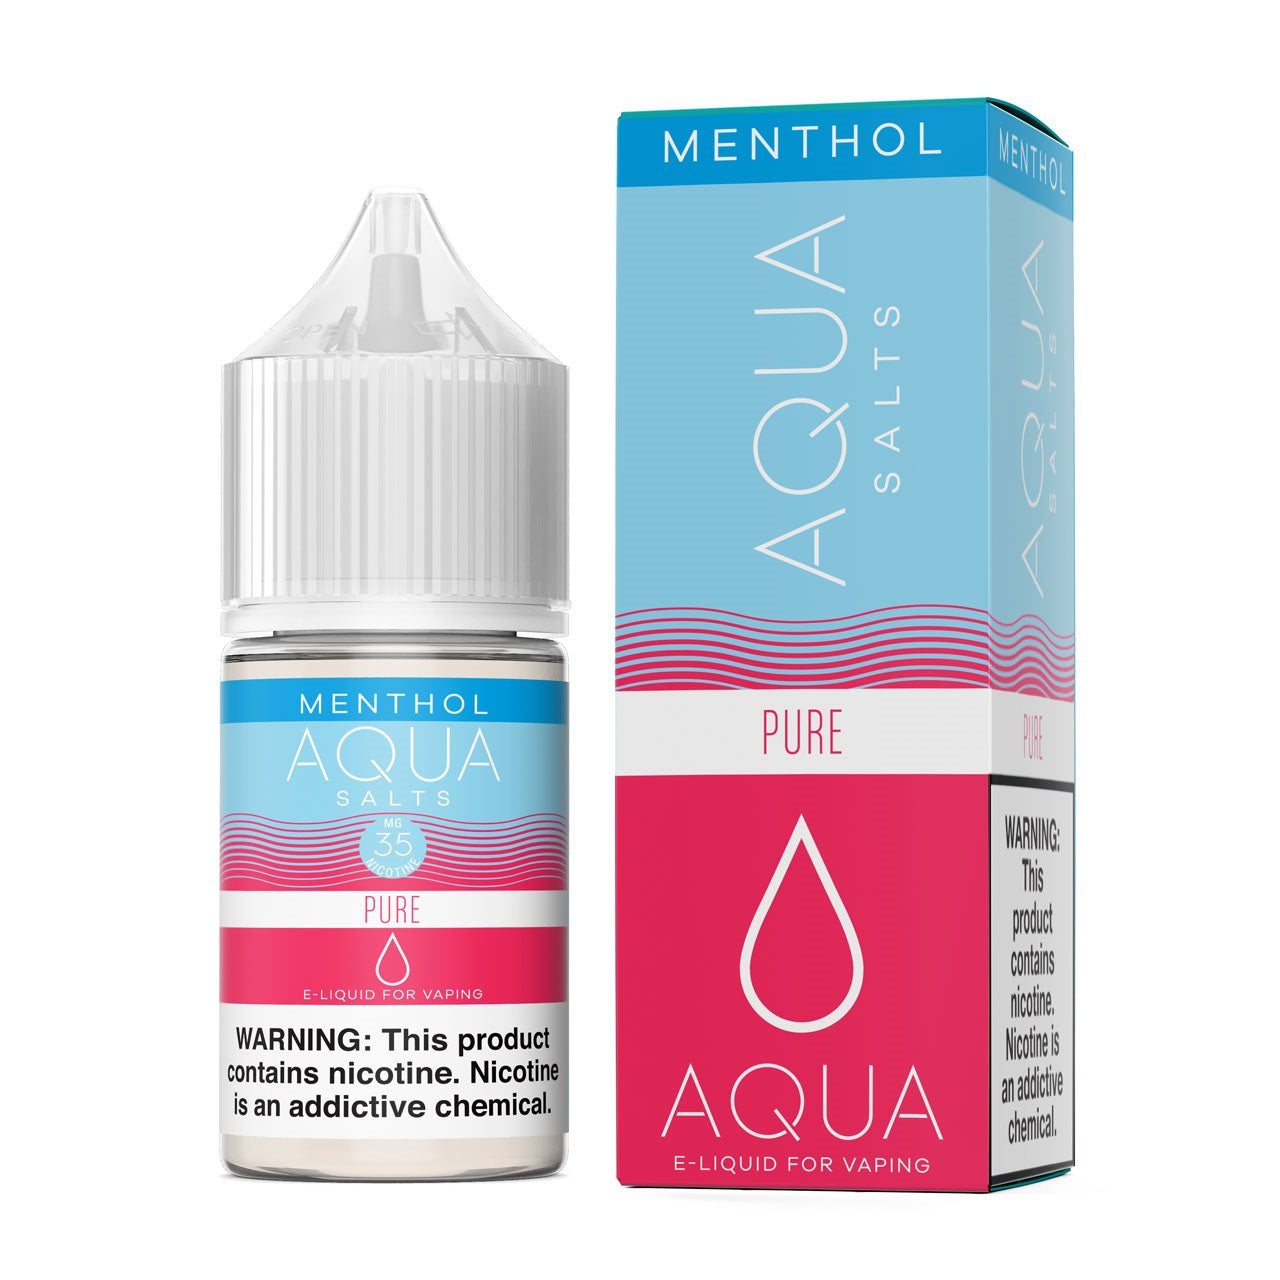 Pure Menthol by Aqua Salts Series 30mL with Packaging